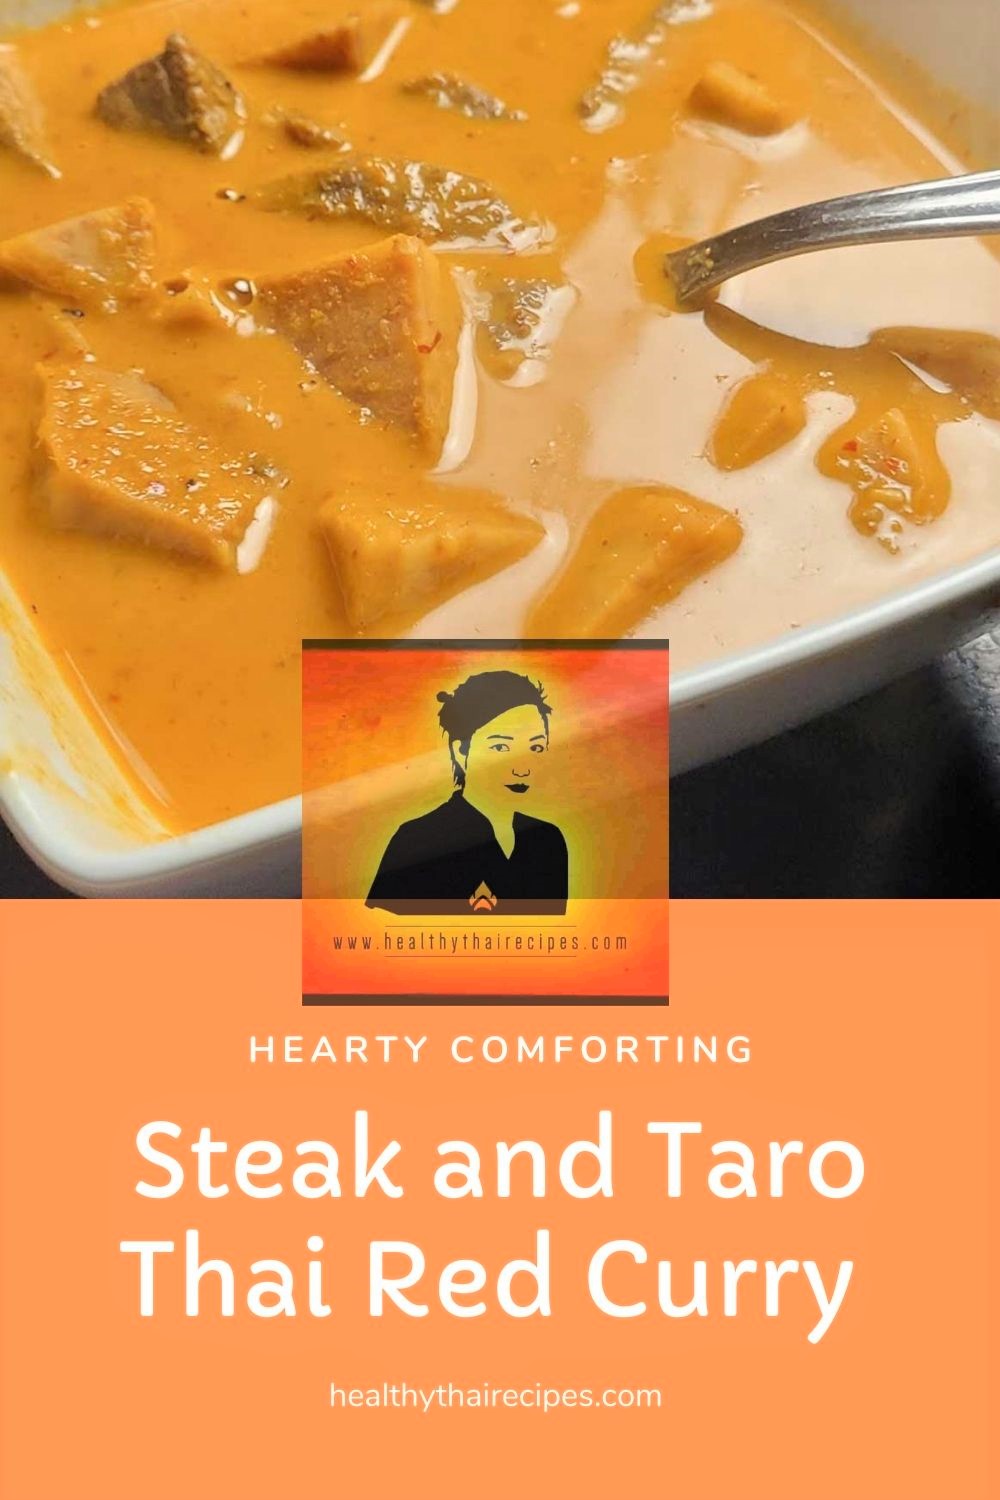 Steak-and-Taro-Thai-Red-Curry-Pinterest-Image-